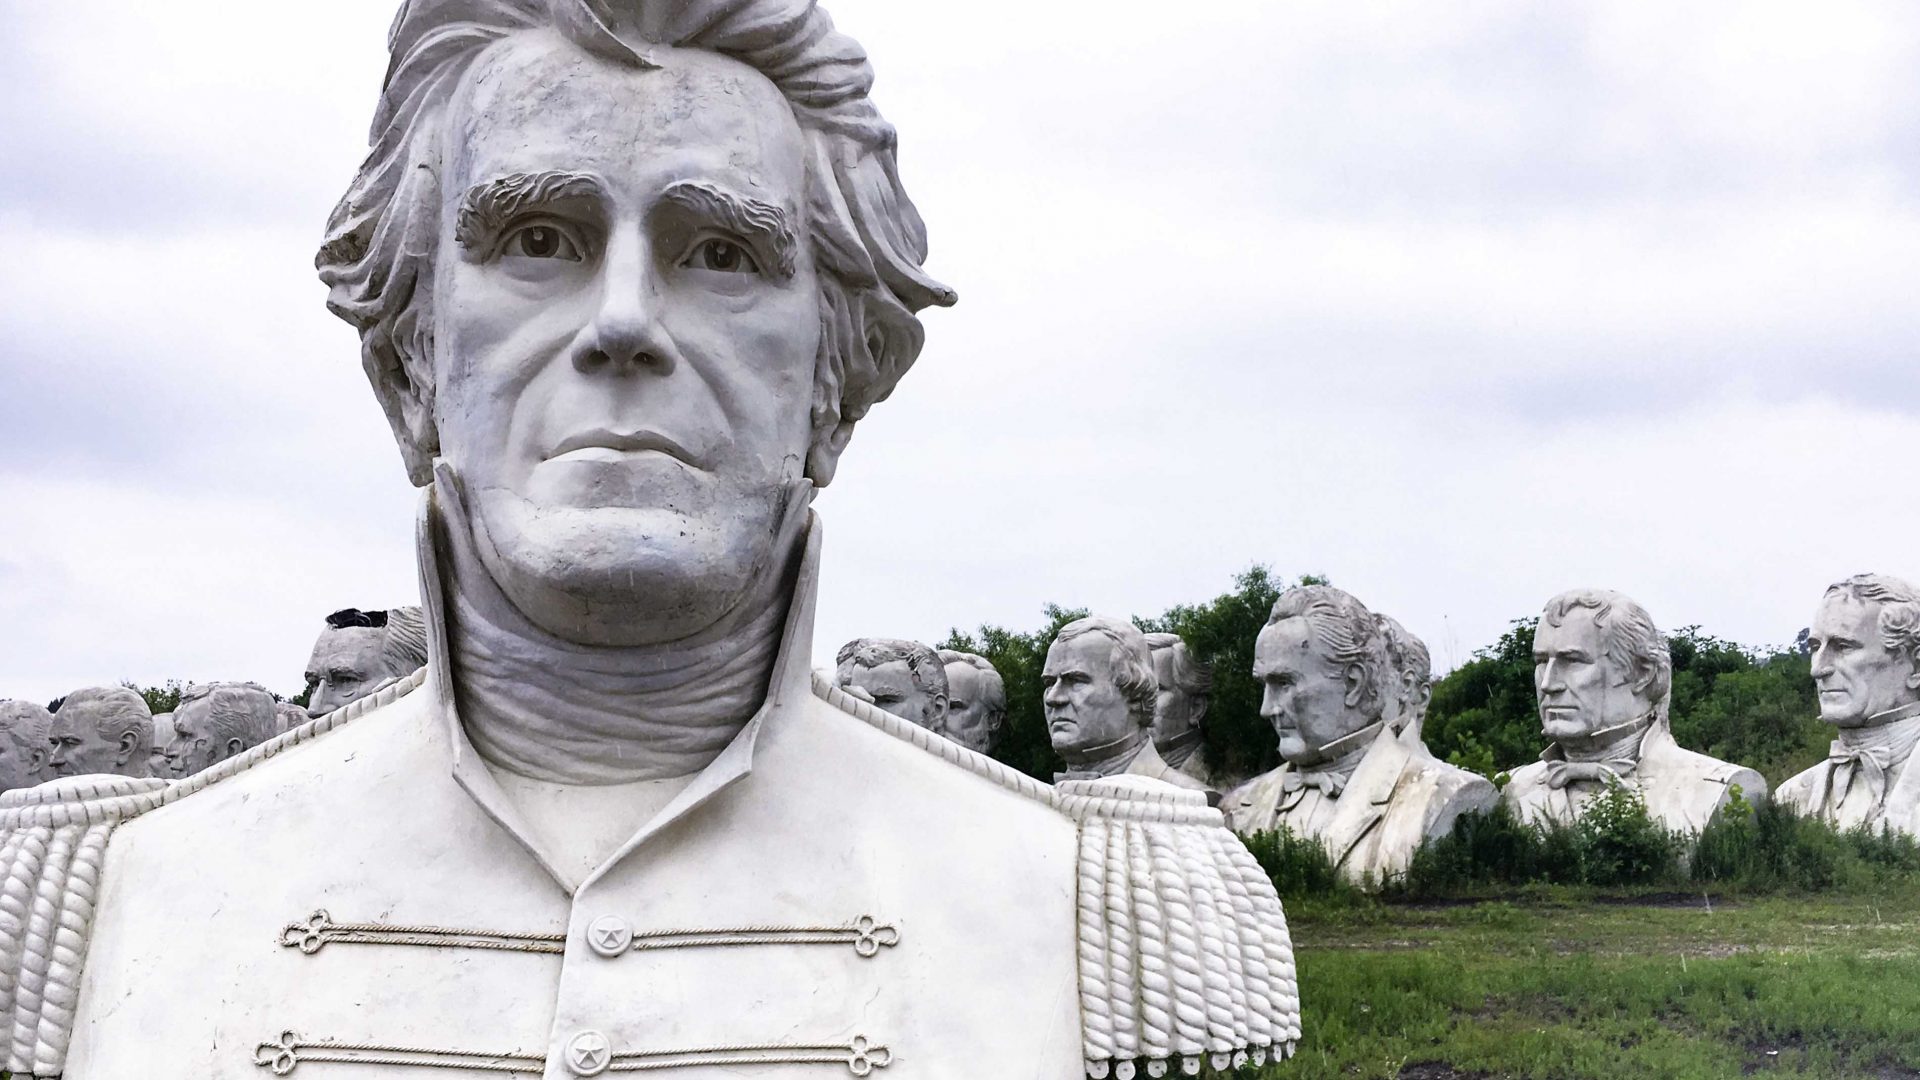 Busts of former US presidents occupy the land of Croaker farmer Howard Hankins in rural Virginia.